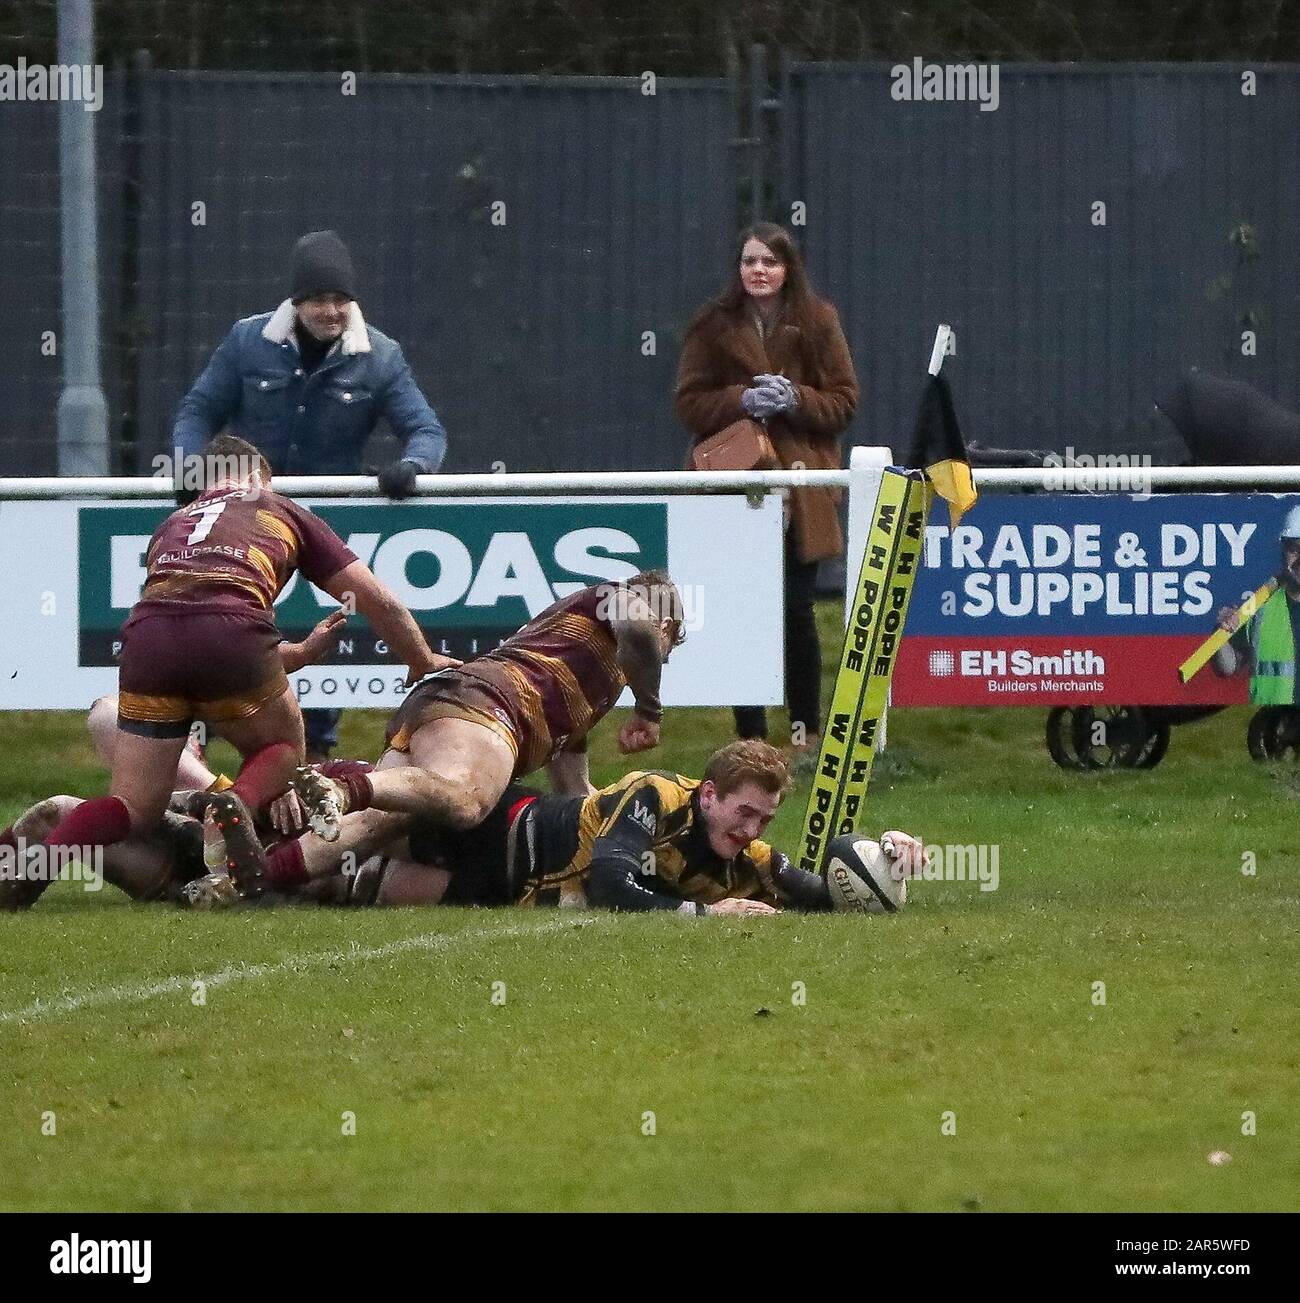 25.01.2020, Hinckley, Leicester, England. Rugby Union, Hinckley rfc v Sedgley Park rfc.   Henry Povoas seals a man of the match performance by scoring a try for Hinckley  in the 64th minute of the RFU National League 2 North (NL2N) game played at the Leicester  Road Stadium. Stock Photo